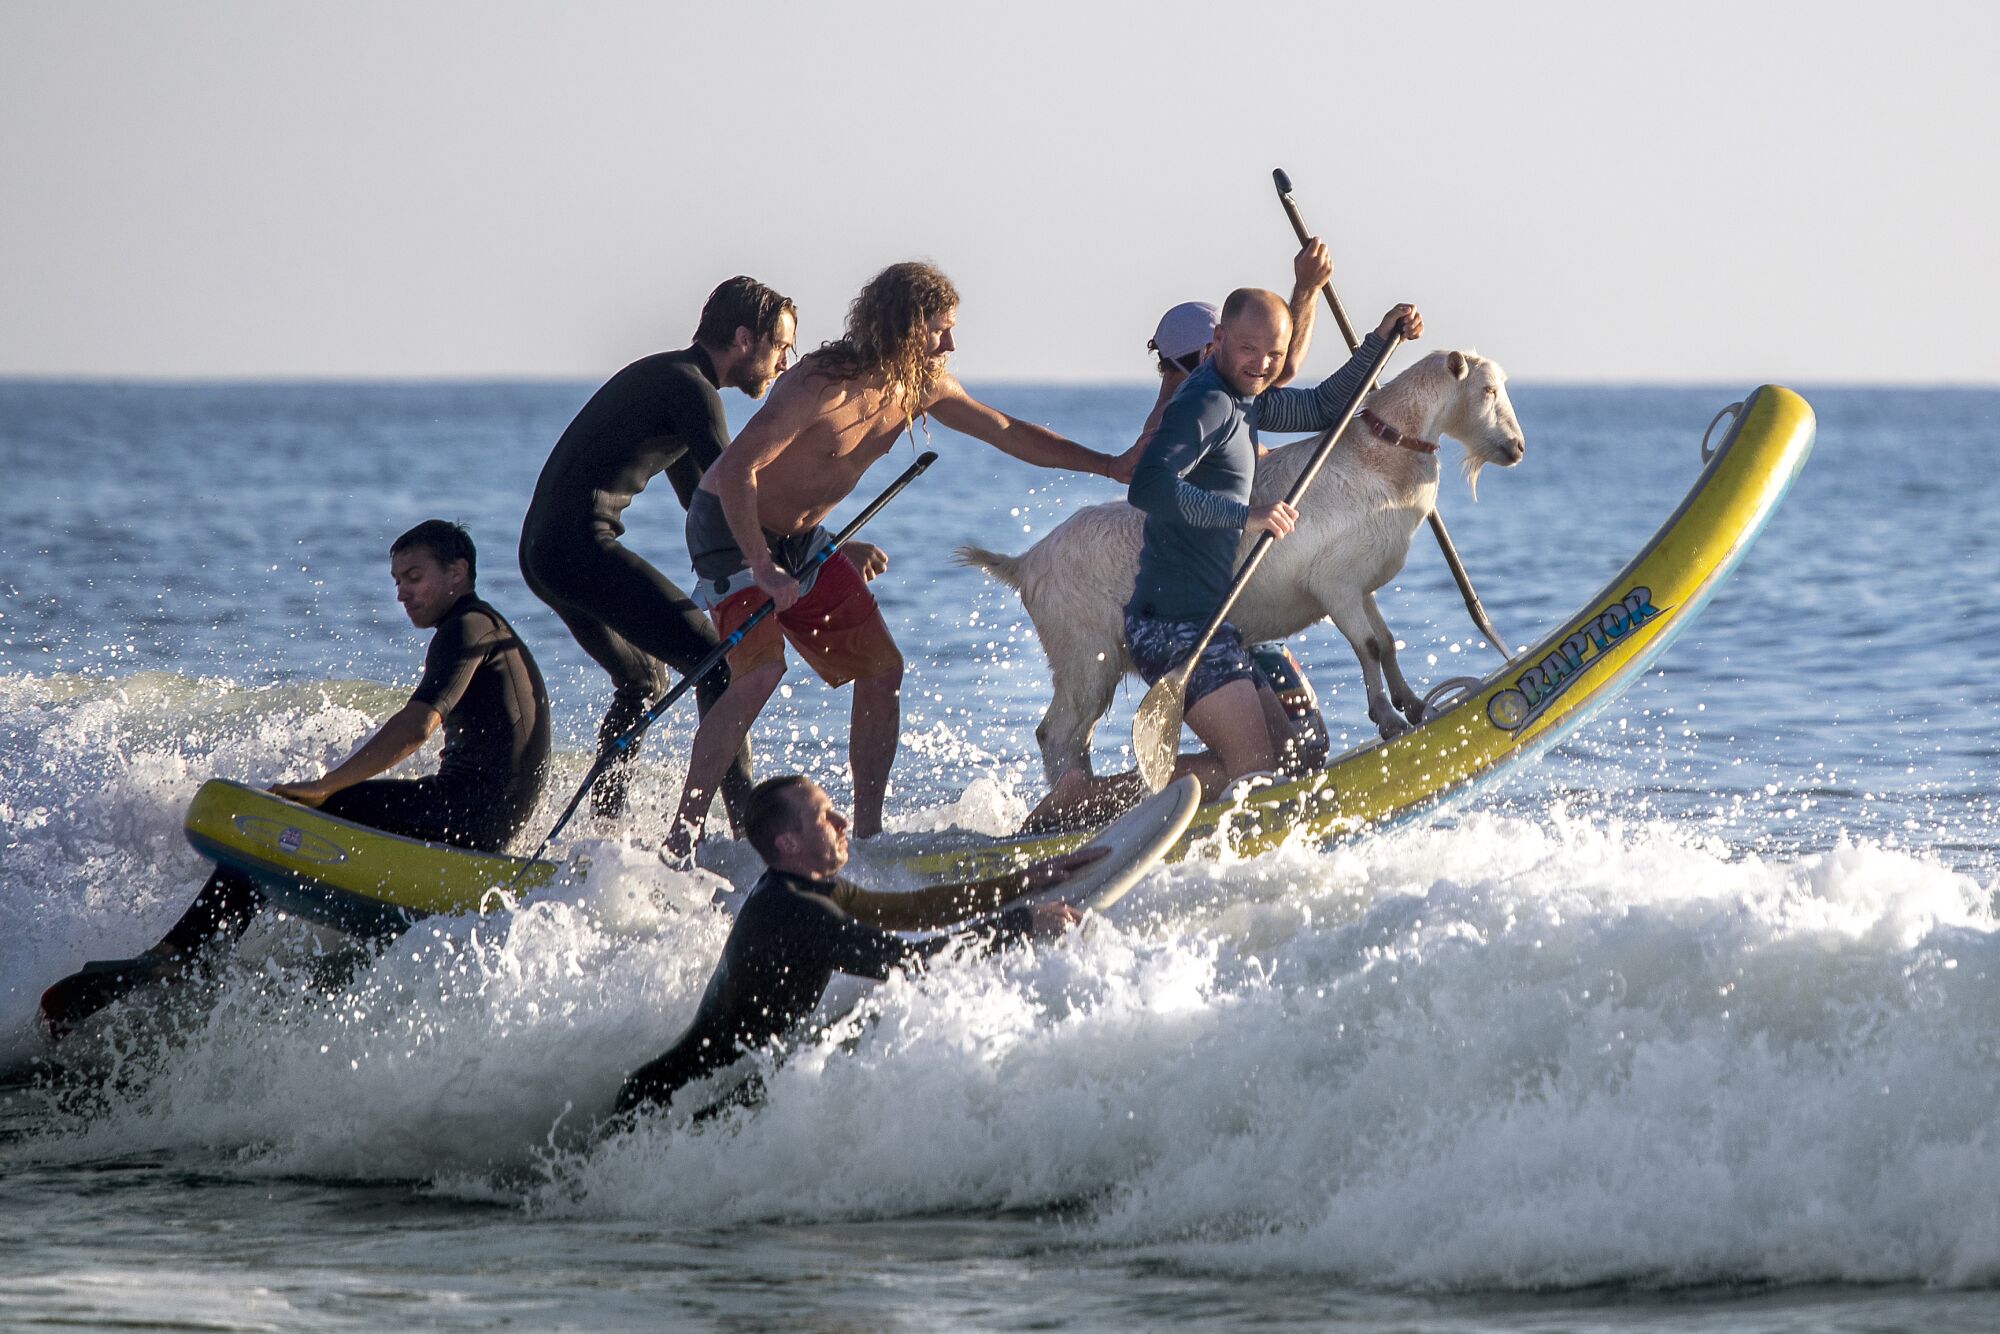 Feb. 5: Several men surf with a goat on a curved surf board in the ocean